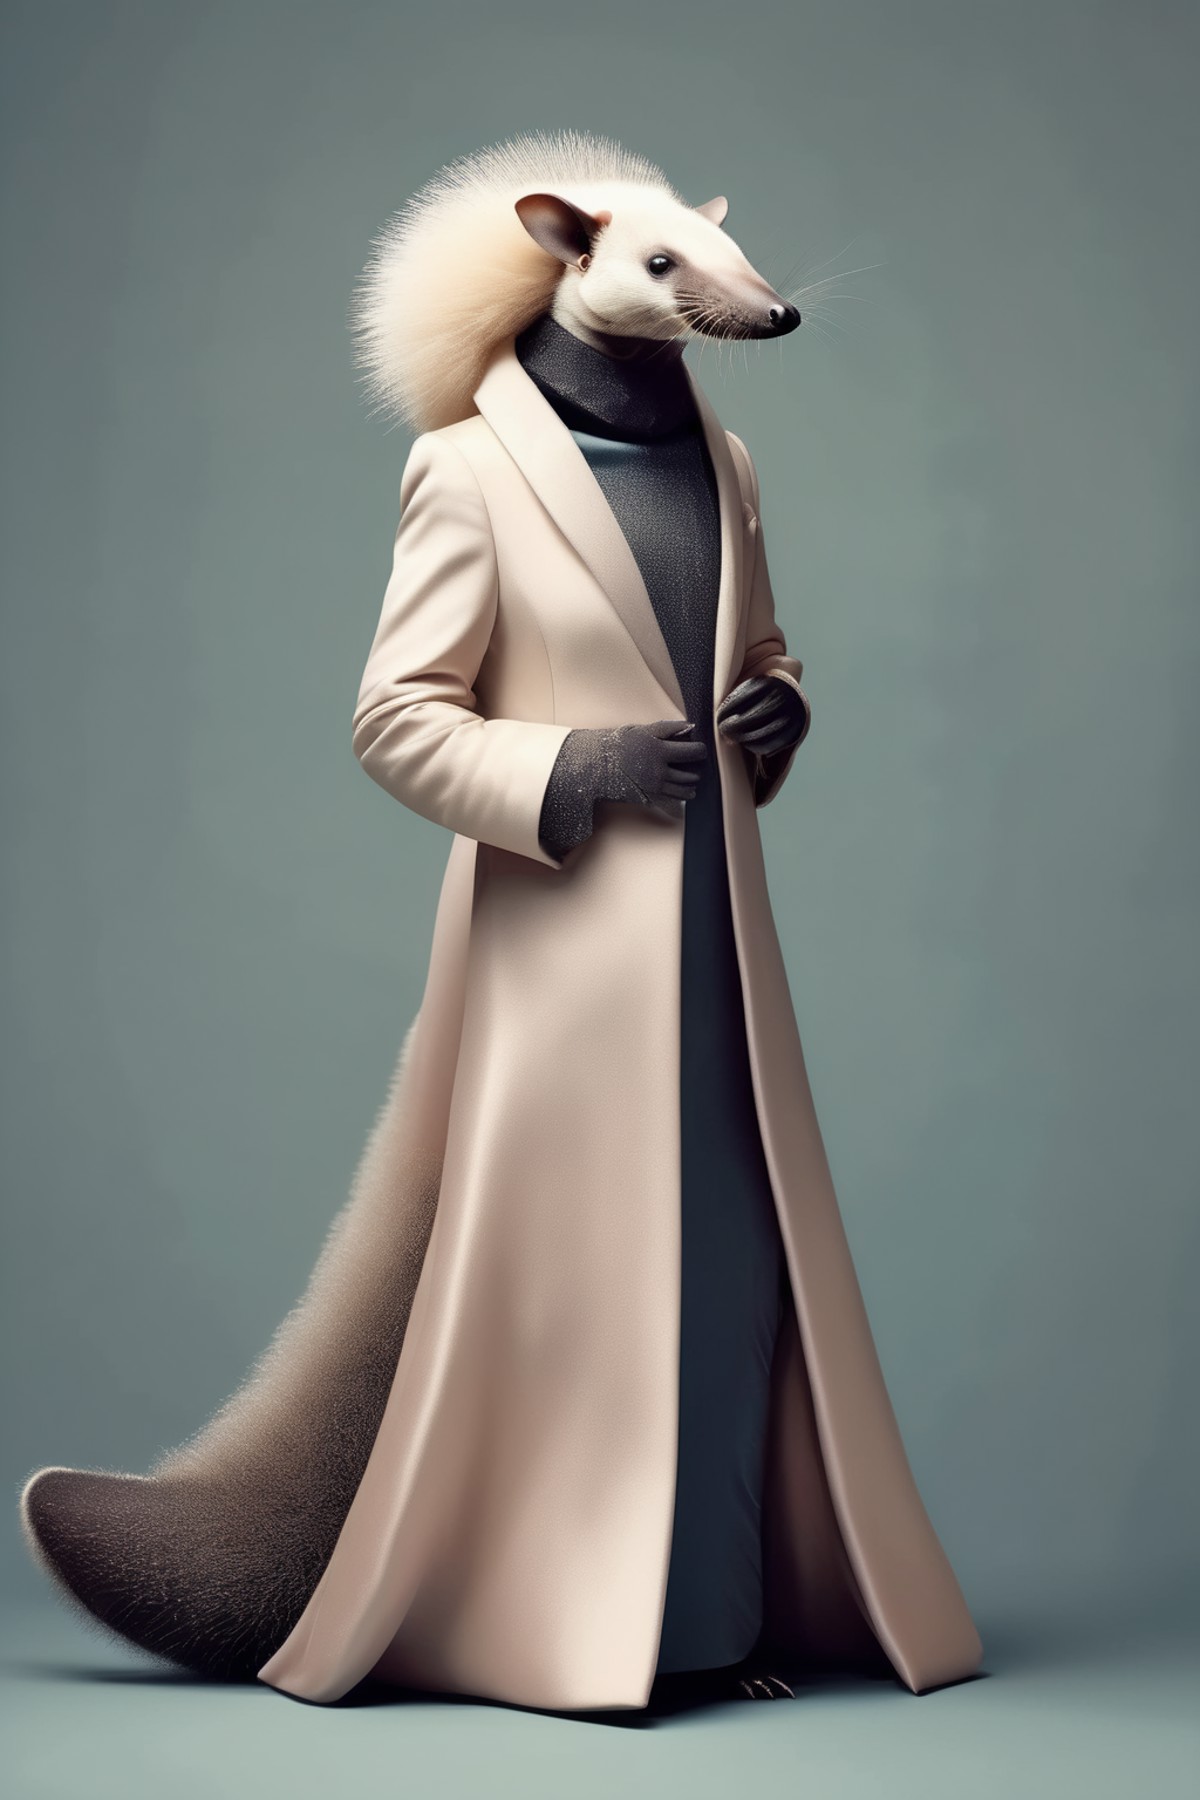 <lora:Dressed animals:1>Dressed animals - elegant anteater, High - fashion, poster - like, Astronaut modeling a sophistica...